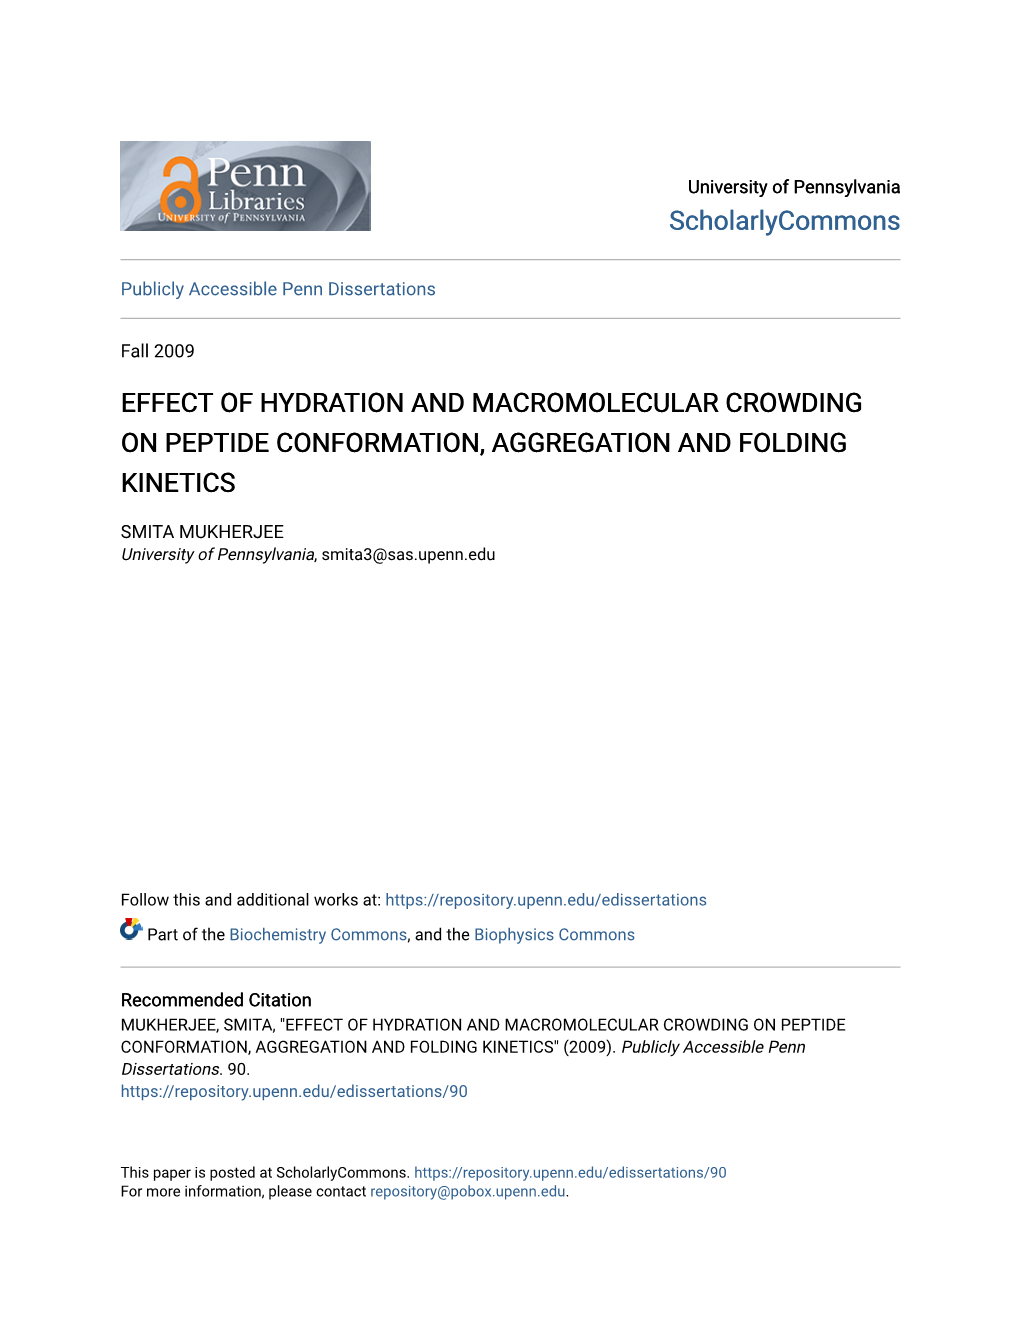 Effect of Hydration and Macromolecular Crowding on Peptide Conformation, Aggregation and Folding Kinetics